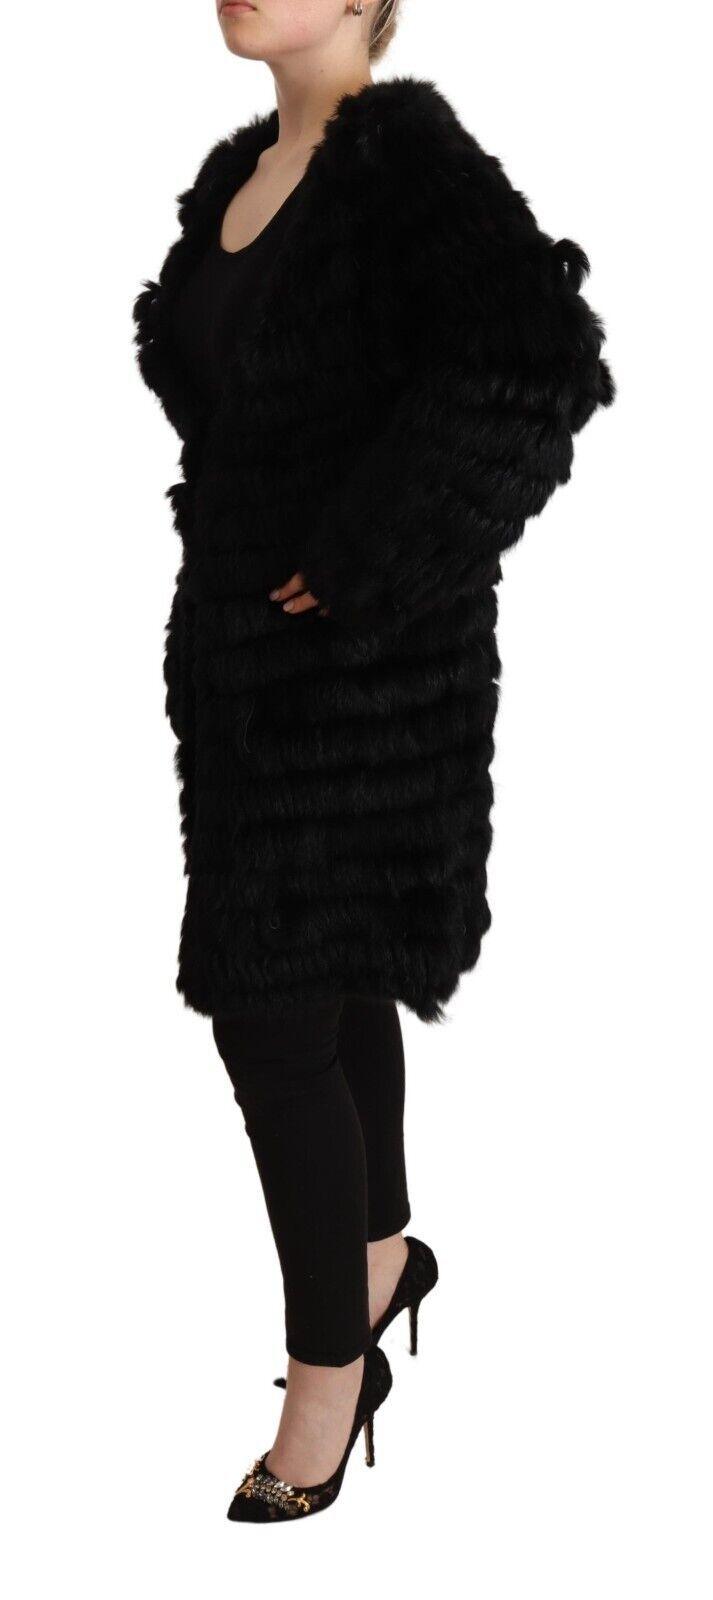 Just Cavalli Women's Black Rabbit Fur Cardigan Long Sleeves Jacket - Designed by Just Cavalli Available to Buy at a Discounted Price on Moon Behind The Hill Online Designer Discount Store